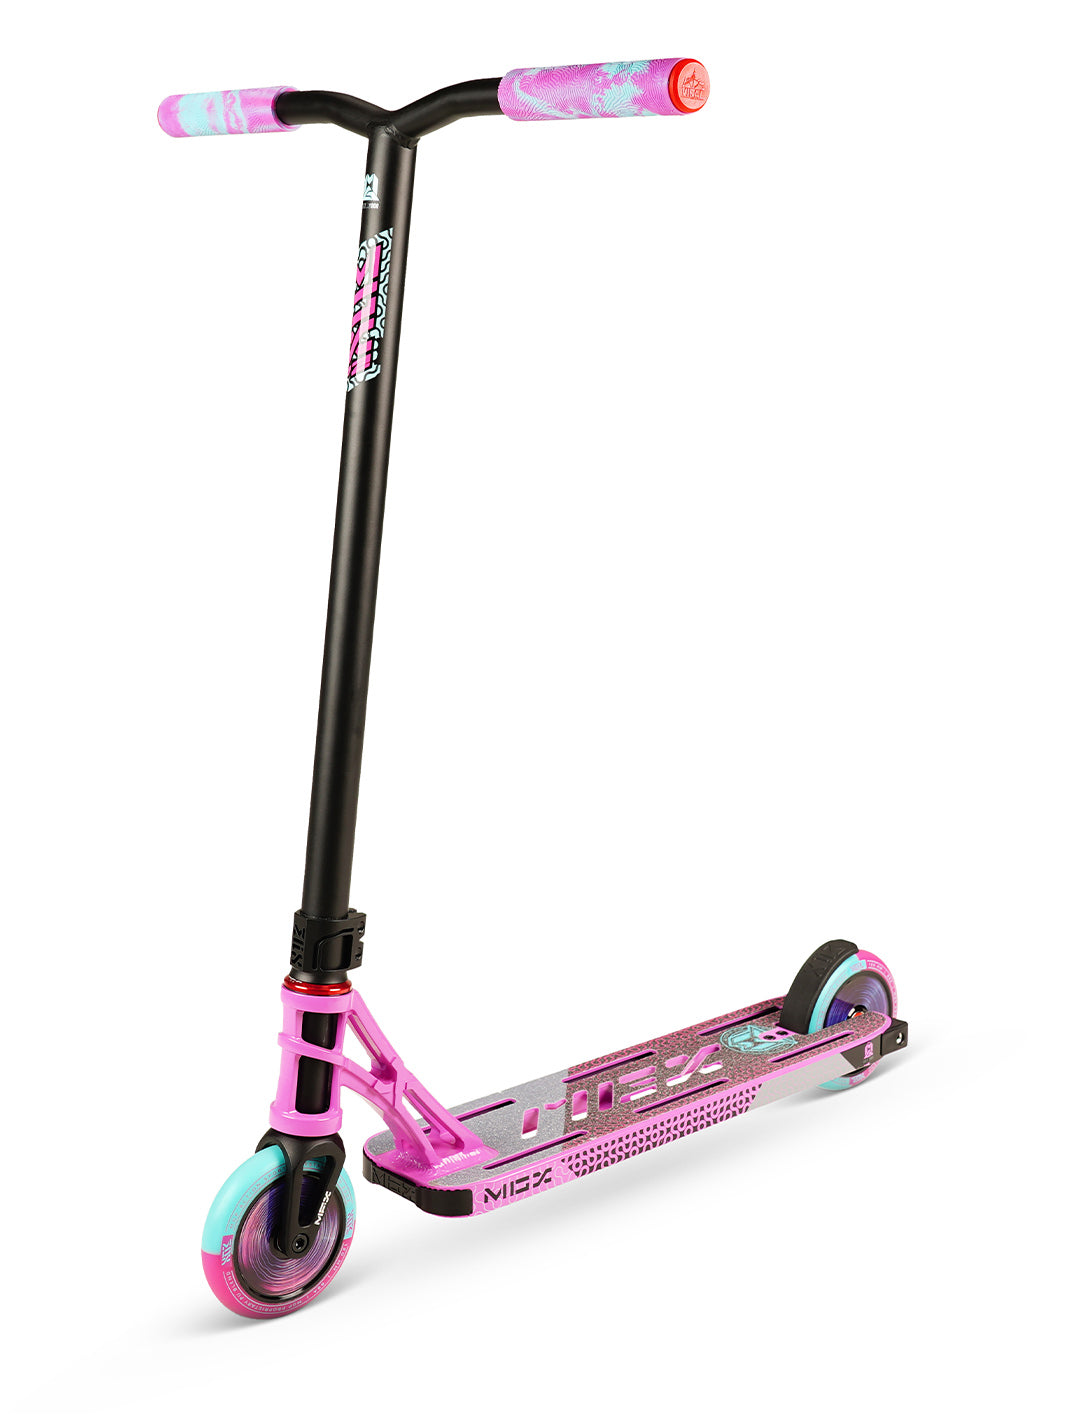 Madd Gear MGP MGX Pro P2 Stunt Scooter Pink Teal Complete